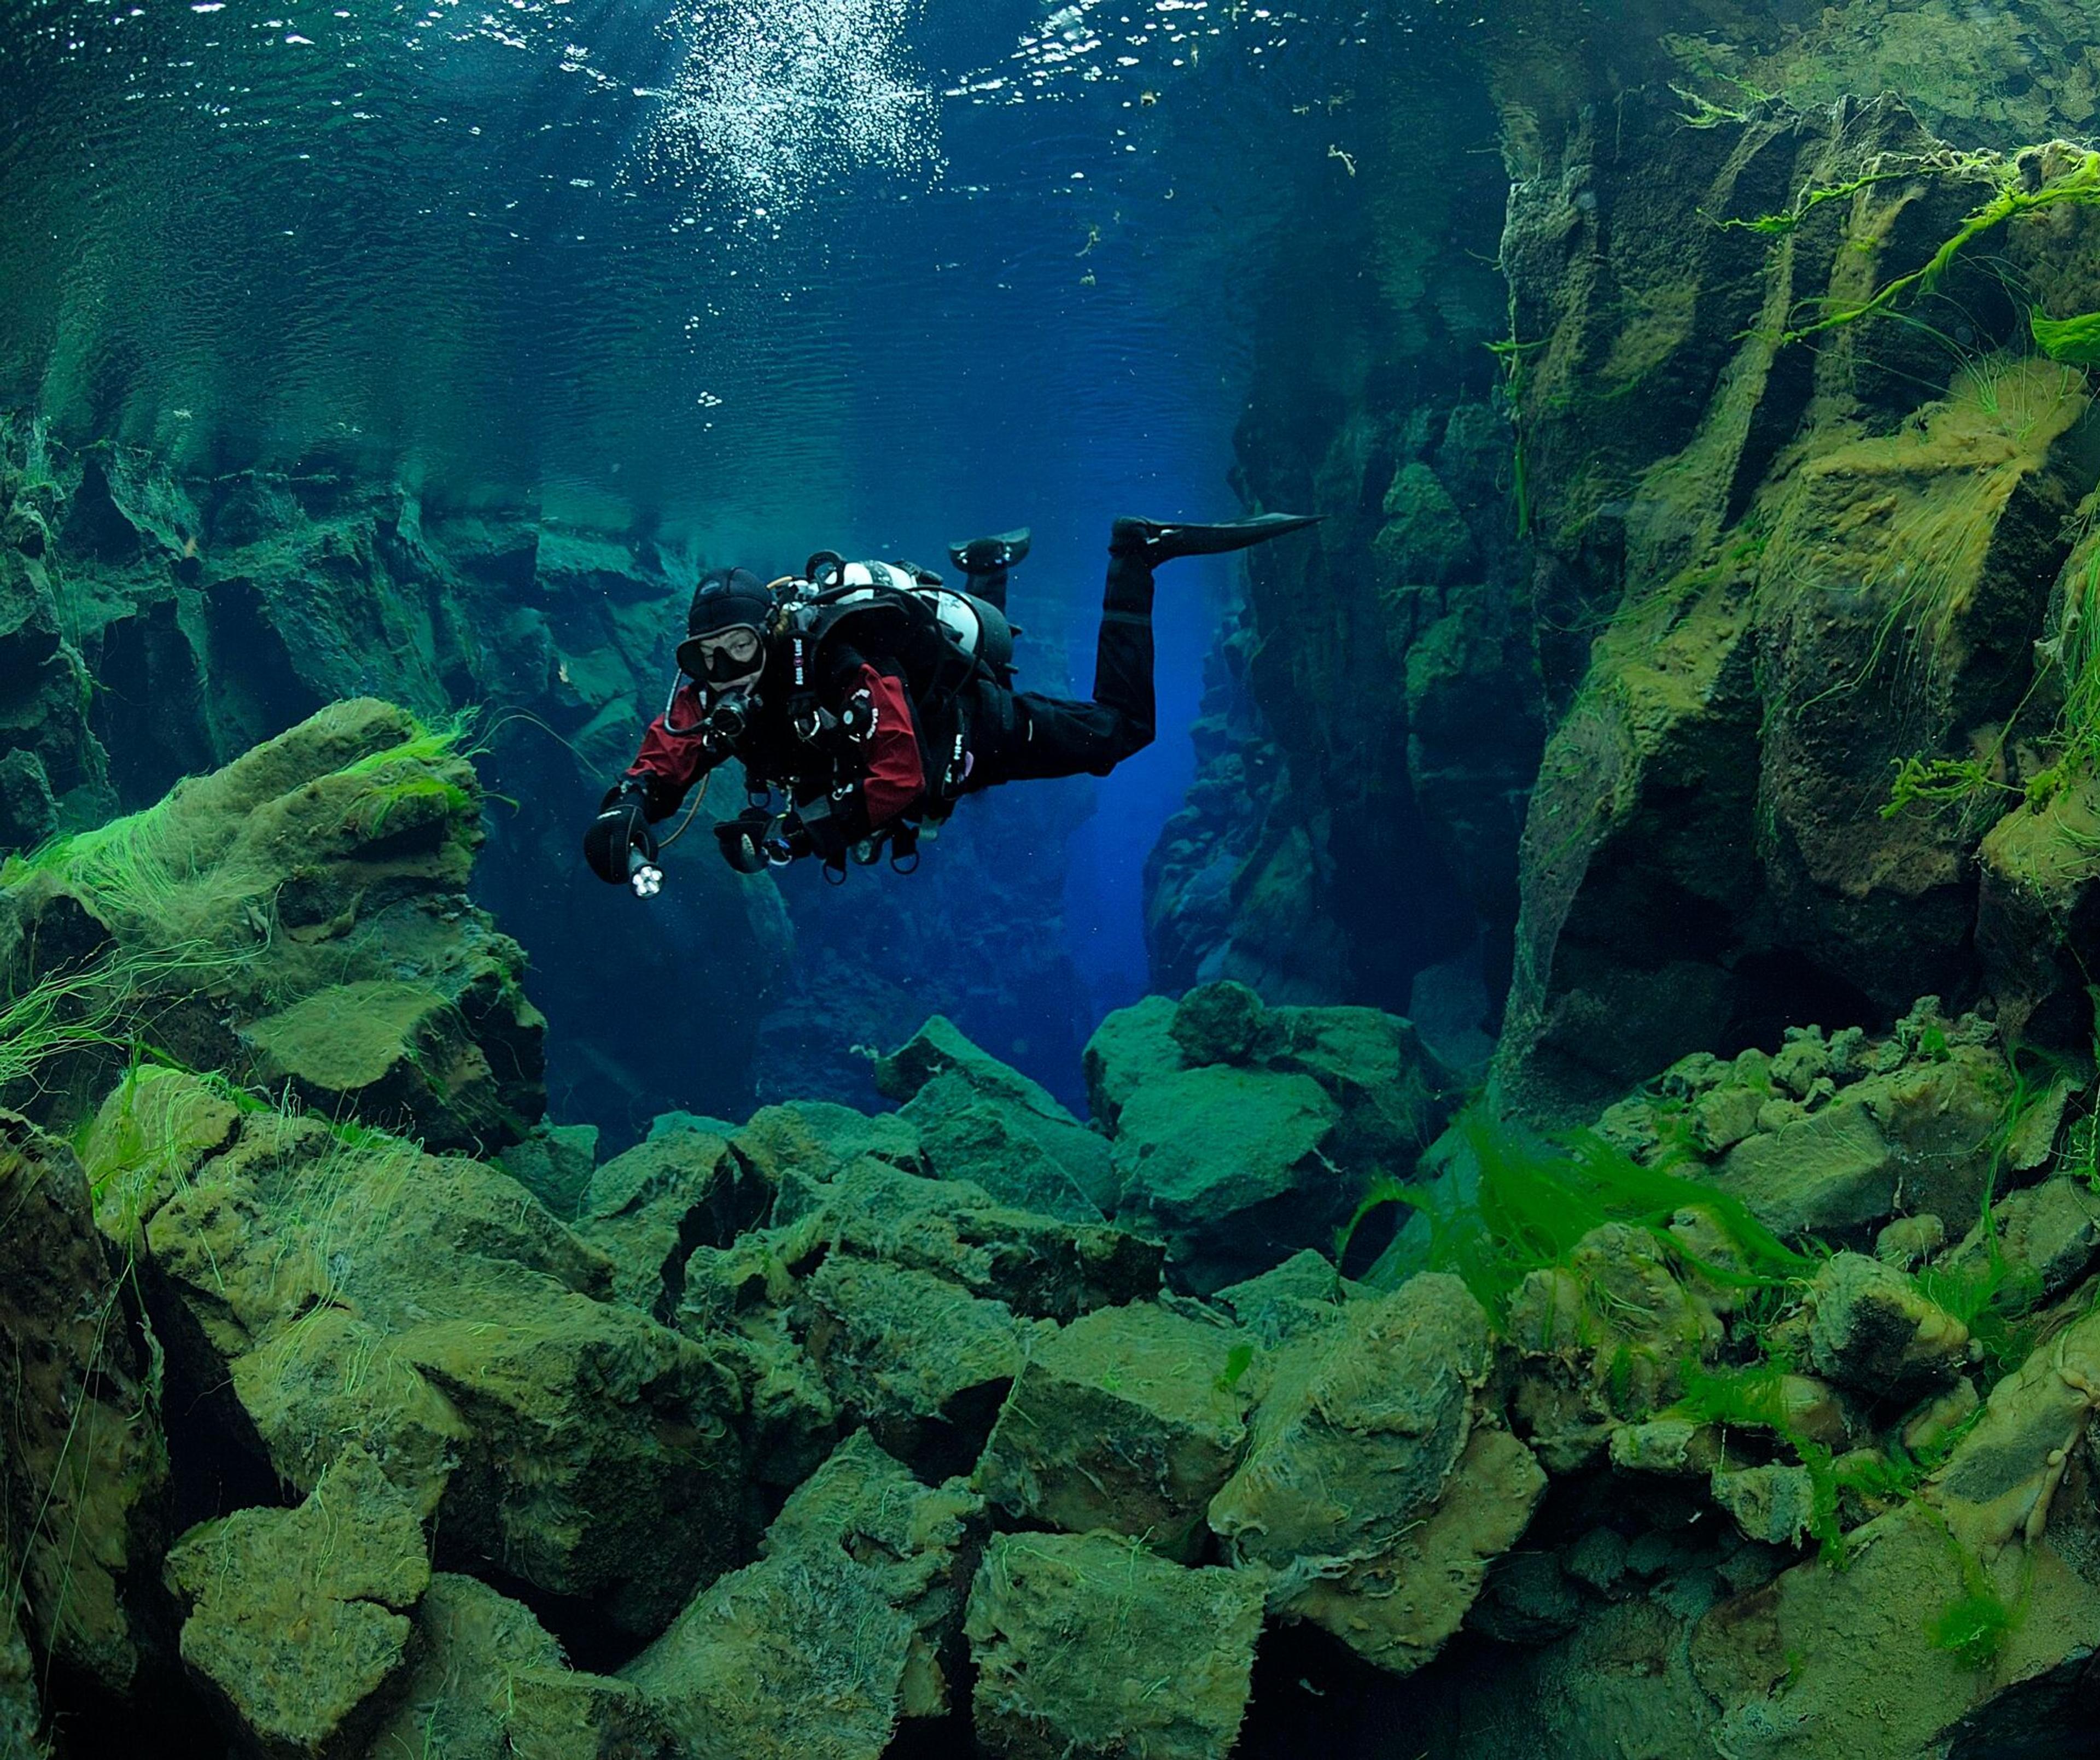 Diver descending into the crystal-clear depths of Silfra fissure, situated between tectonic plates.